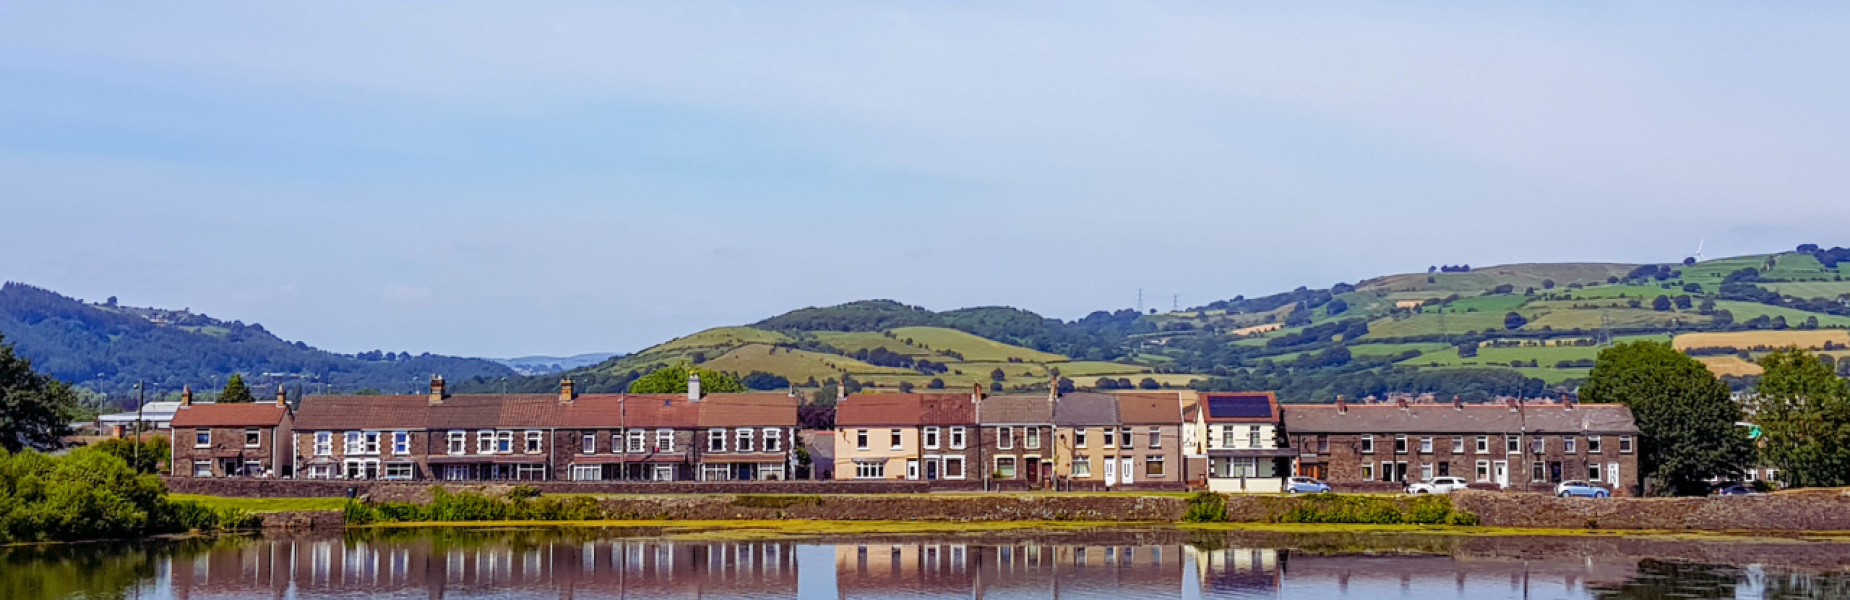 Houses in Caerphilly town